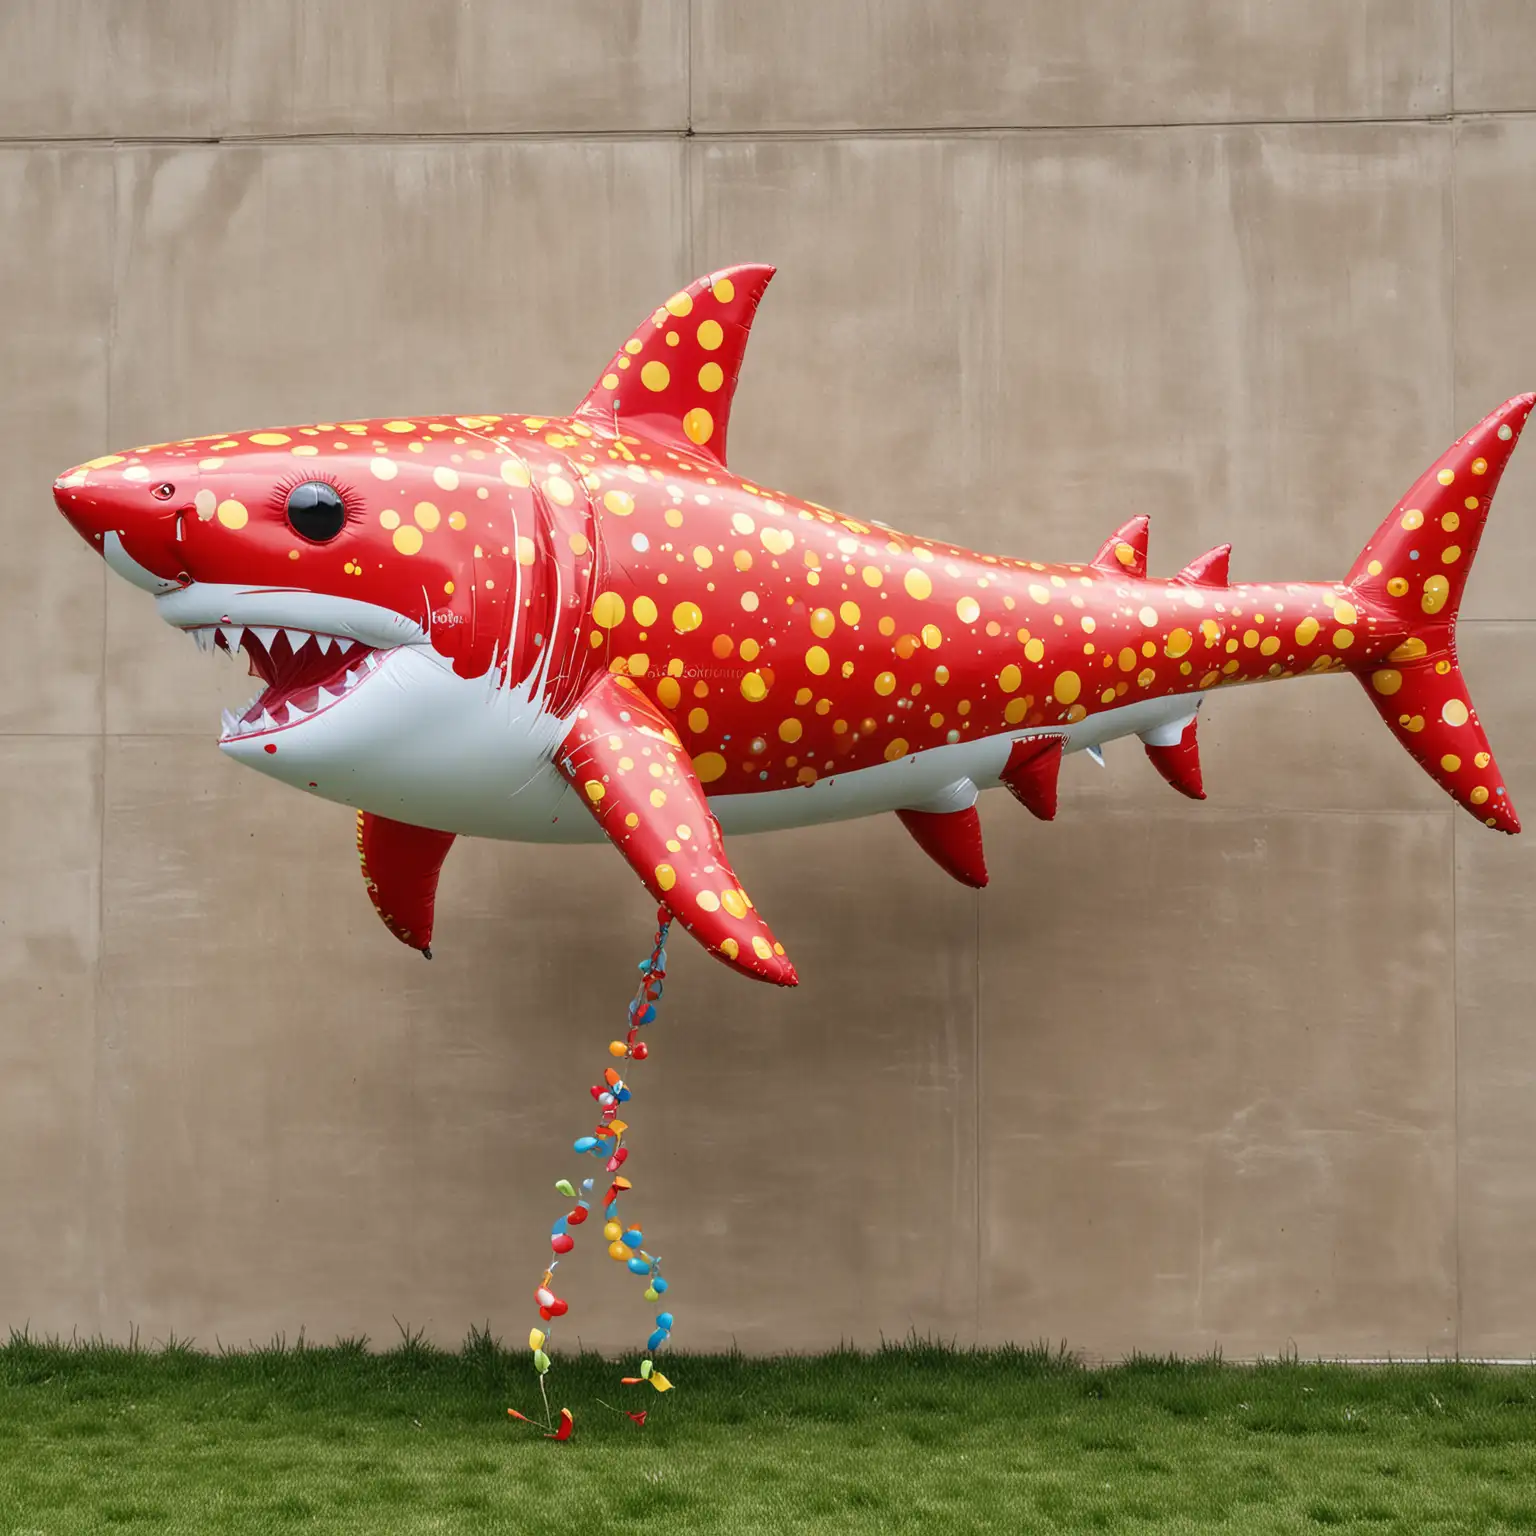 Colorful Red Balloon Shark with Yellow Dots at Big Festival